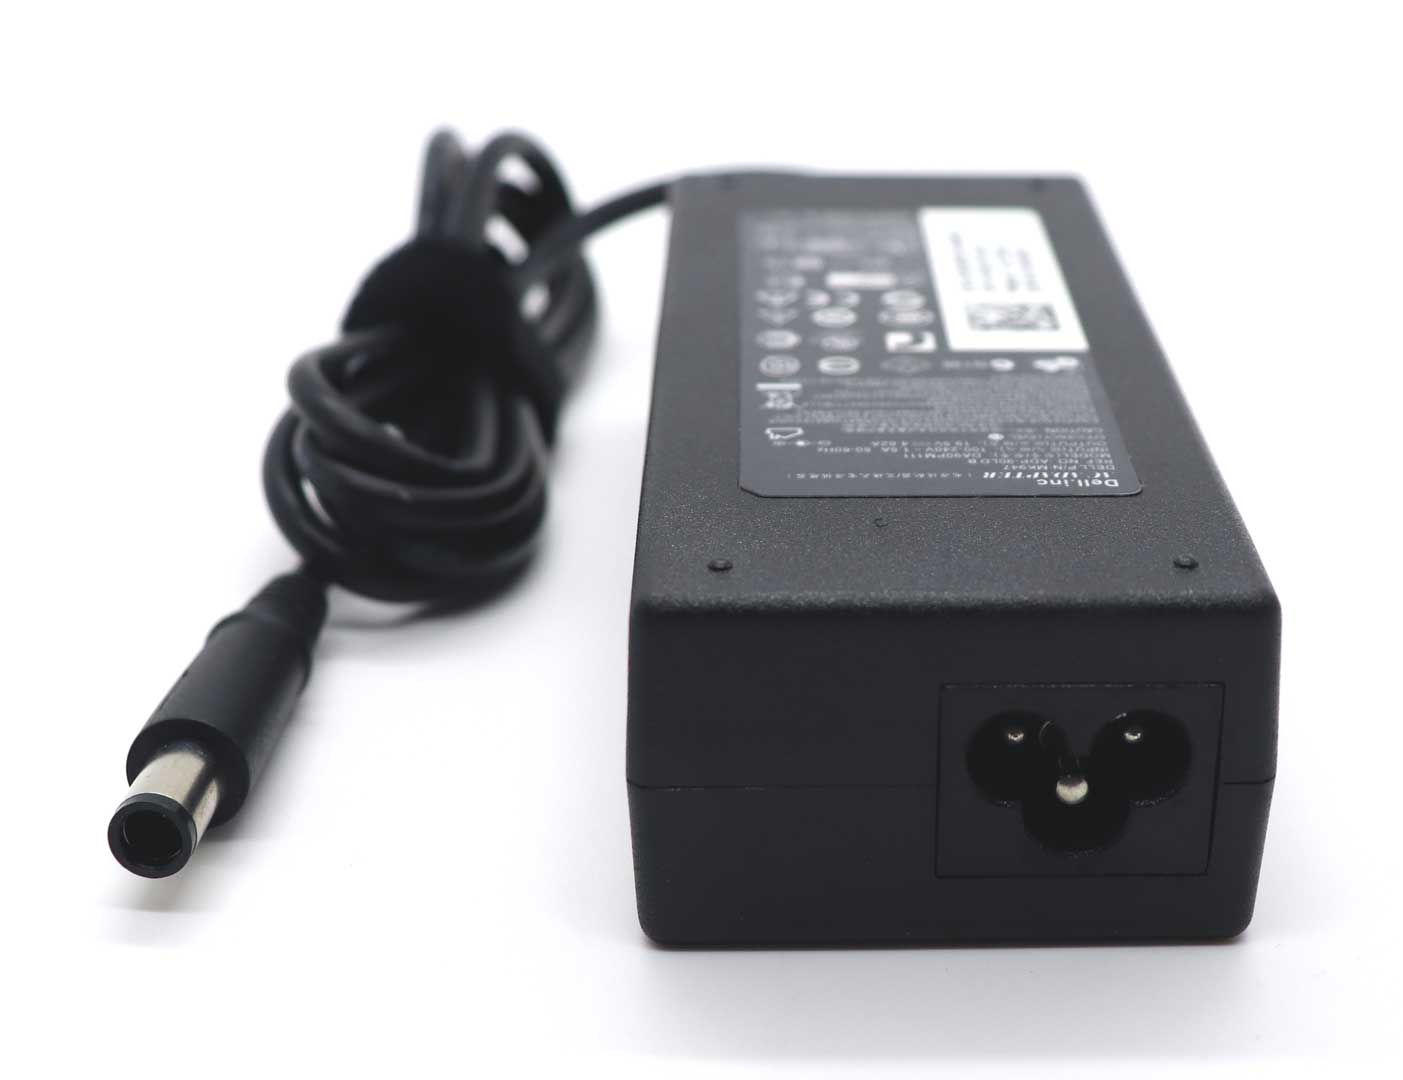 Dell Original 90 W Adapter for 15R-5547  (Power Cord Included)